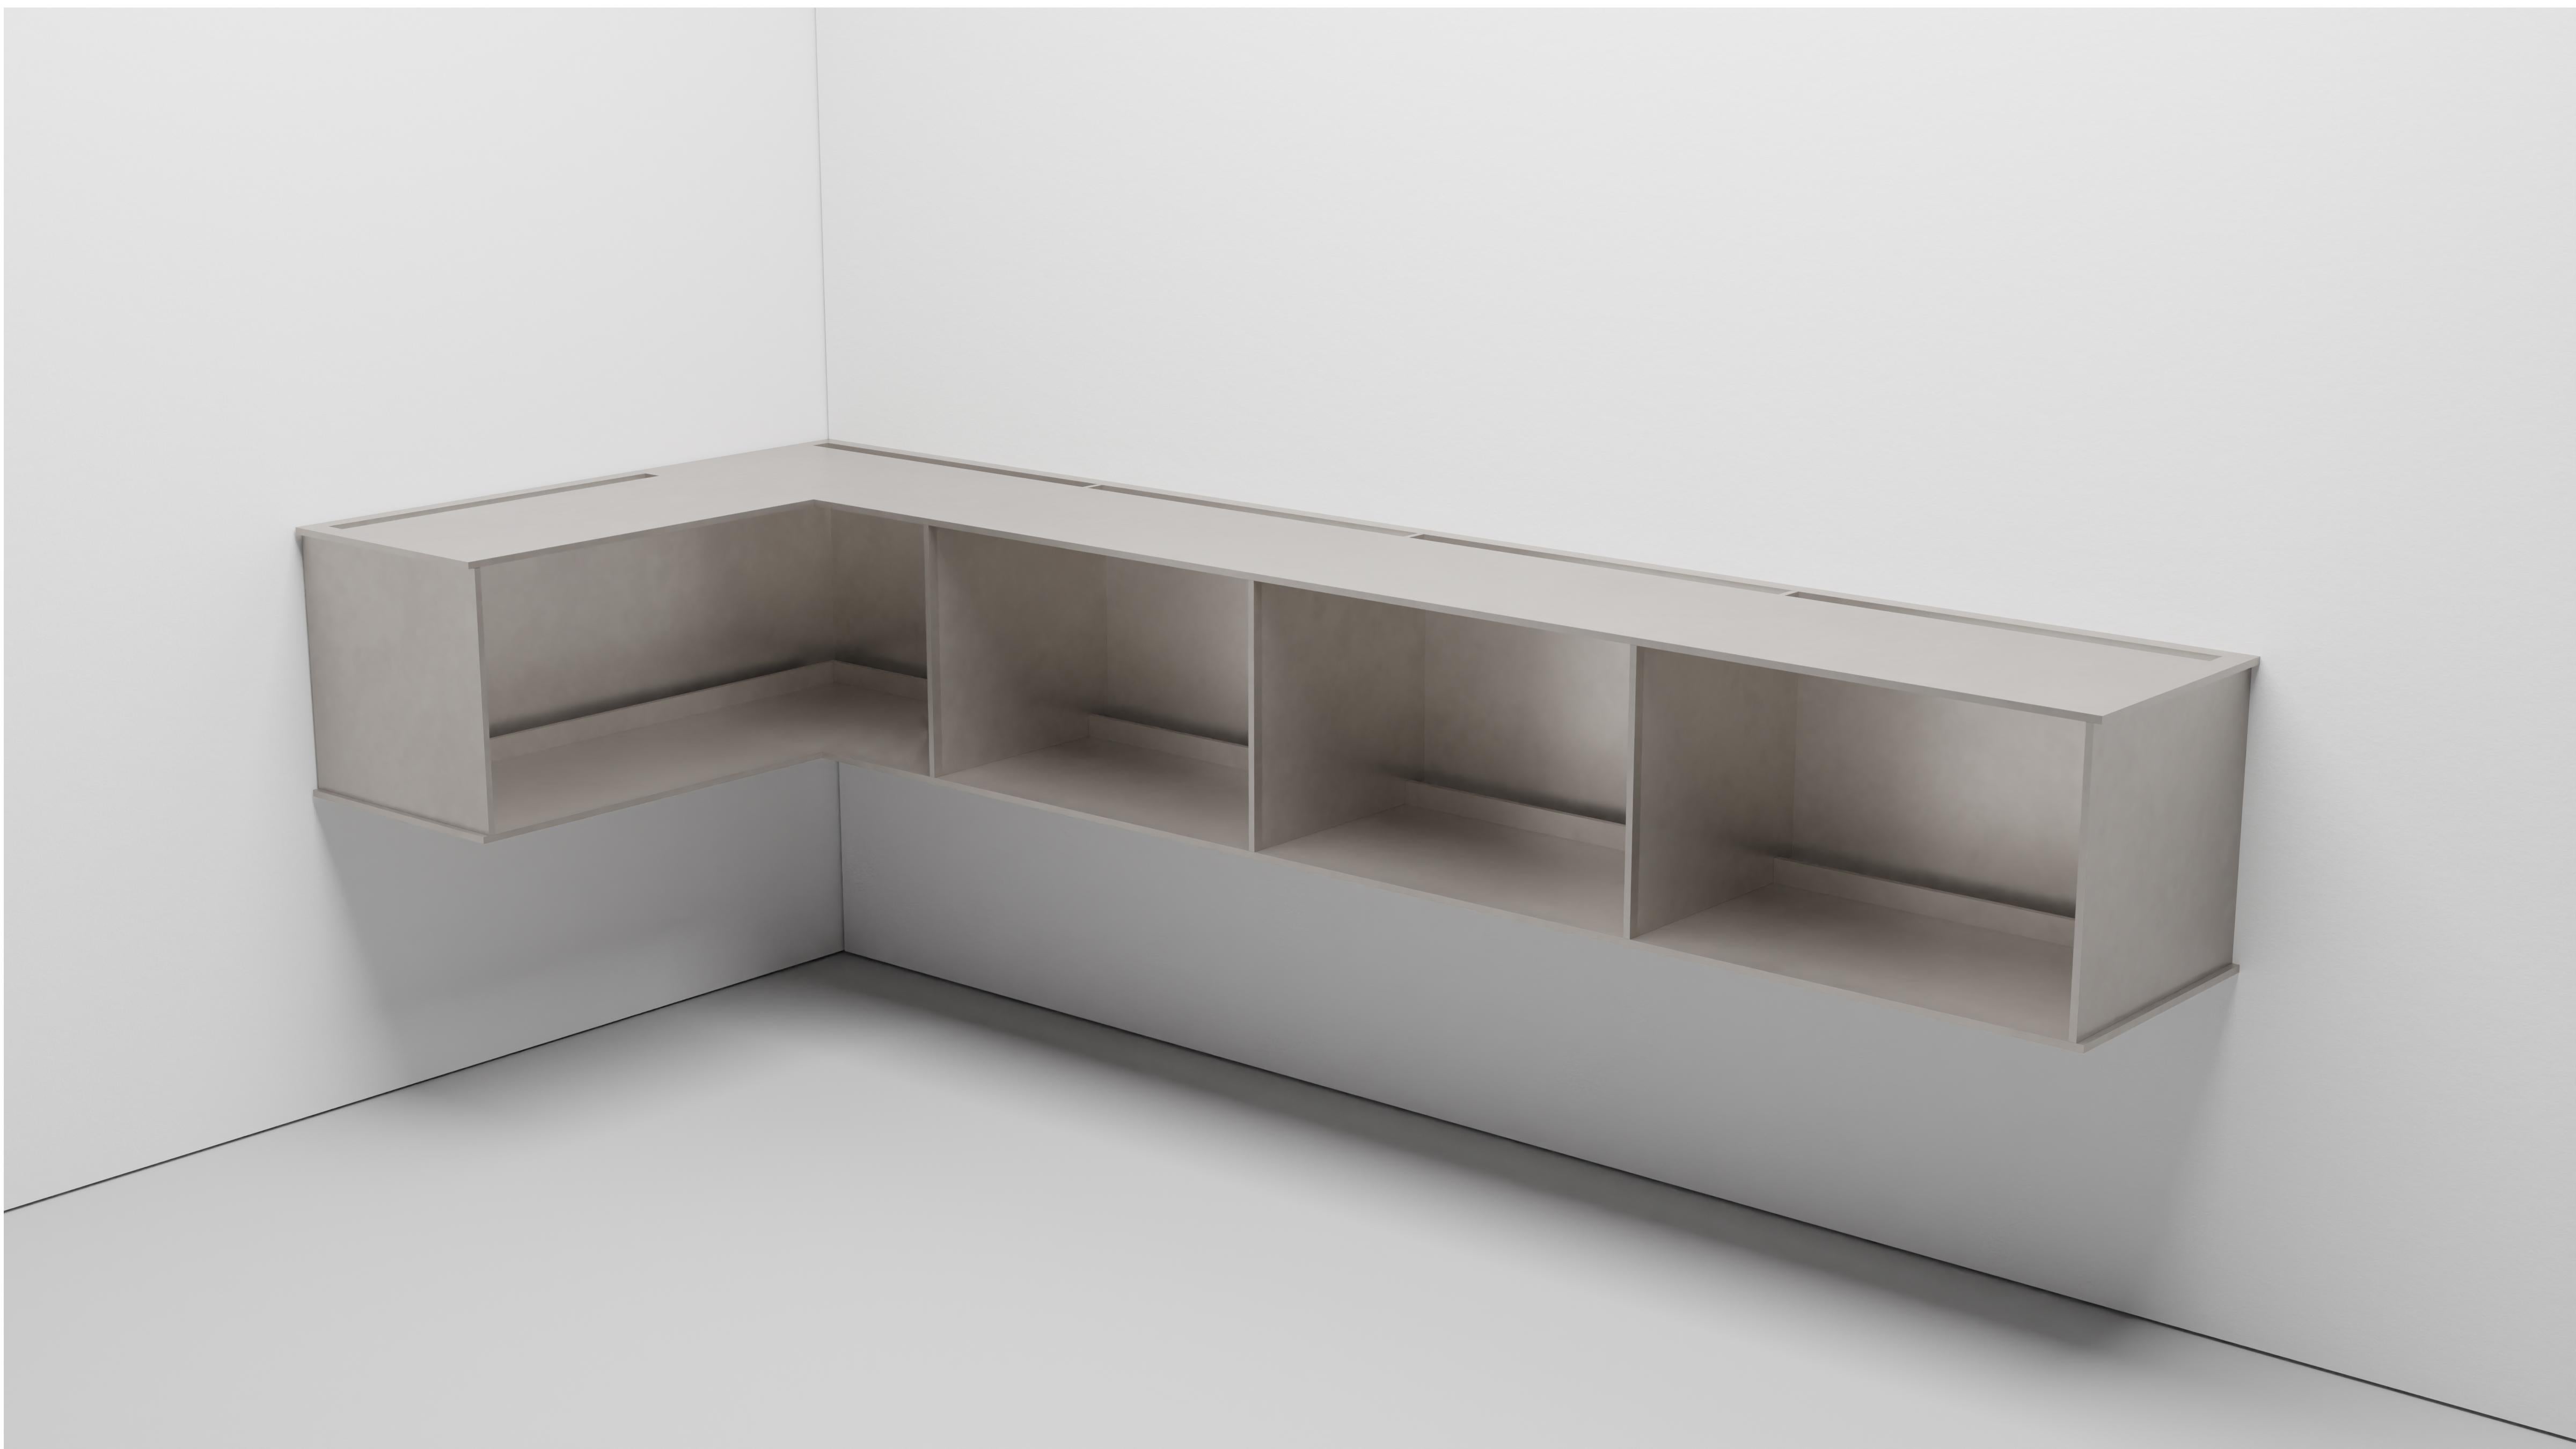 The Minimalist wall-mounted, 95.5 wide, G shelf is sculpted out of 3-8 inch thick, wax-polished aluminum. Each shelf has an inset welded U-channel that spans the length of the shelf and easily mounts on included custom-bent steel Z-clips. The